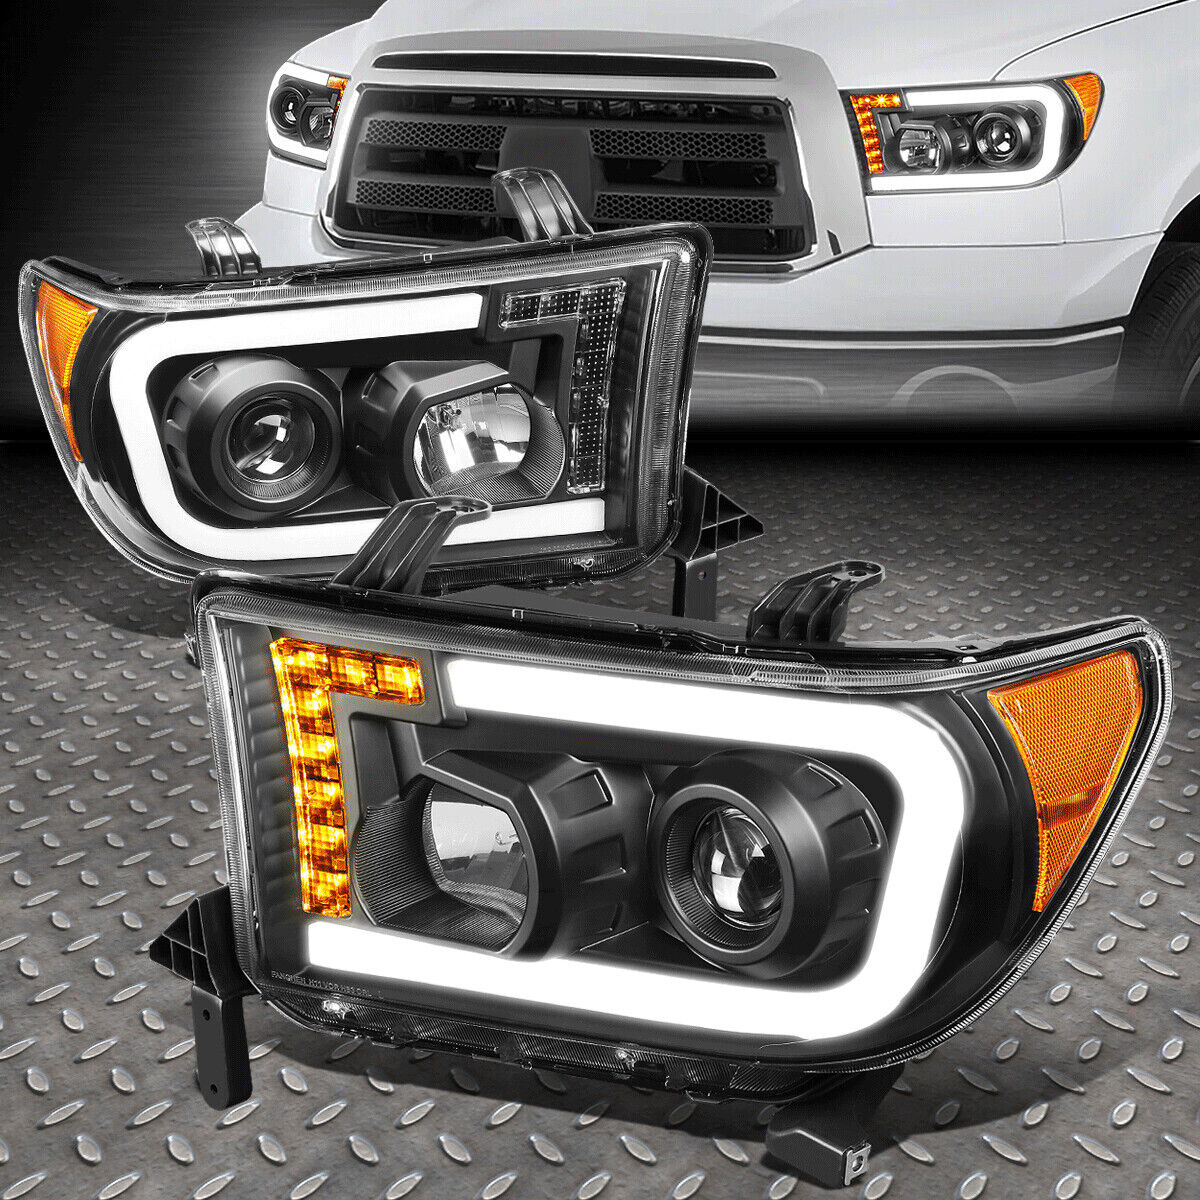 FOR 07-13 TOYOTA TUNDRA PAIR FRONT LED DRL+TURN SIGNAL PROJECTOR HEADLIGHT LAMPS